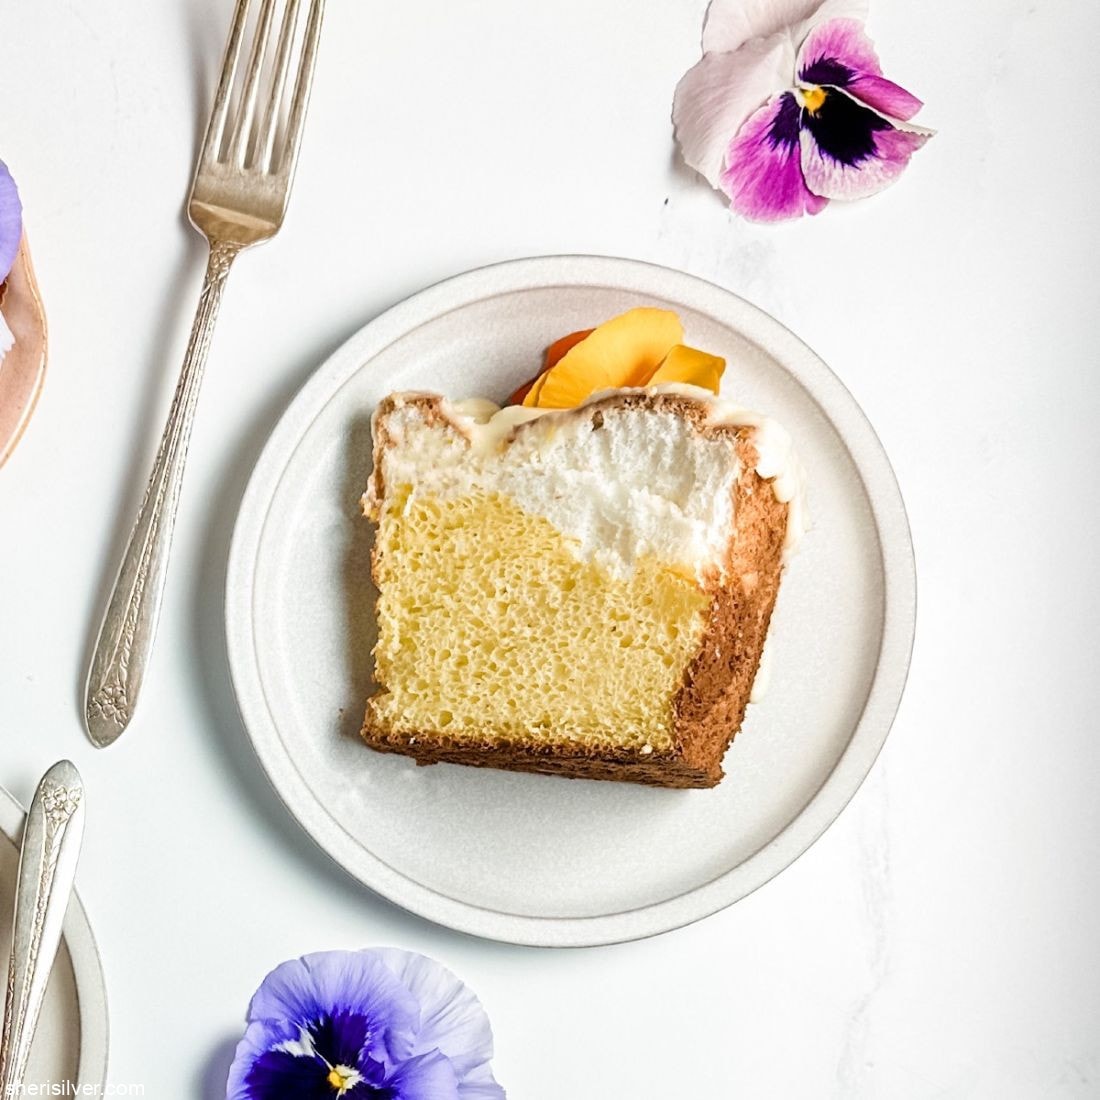 Make this daffodil cake recipe for spring!